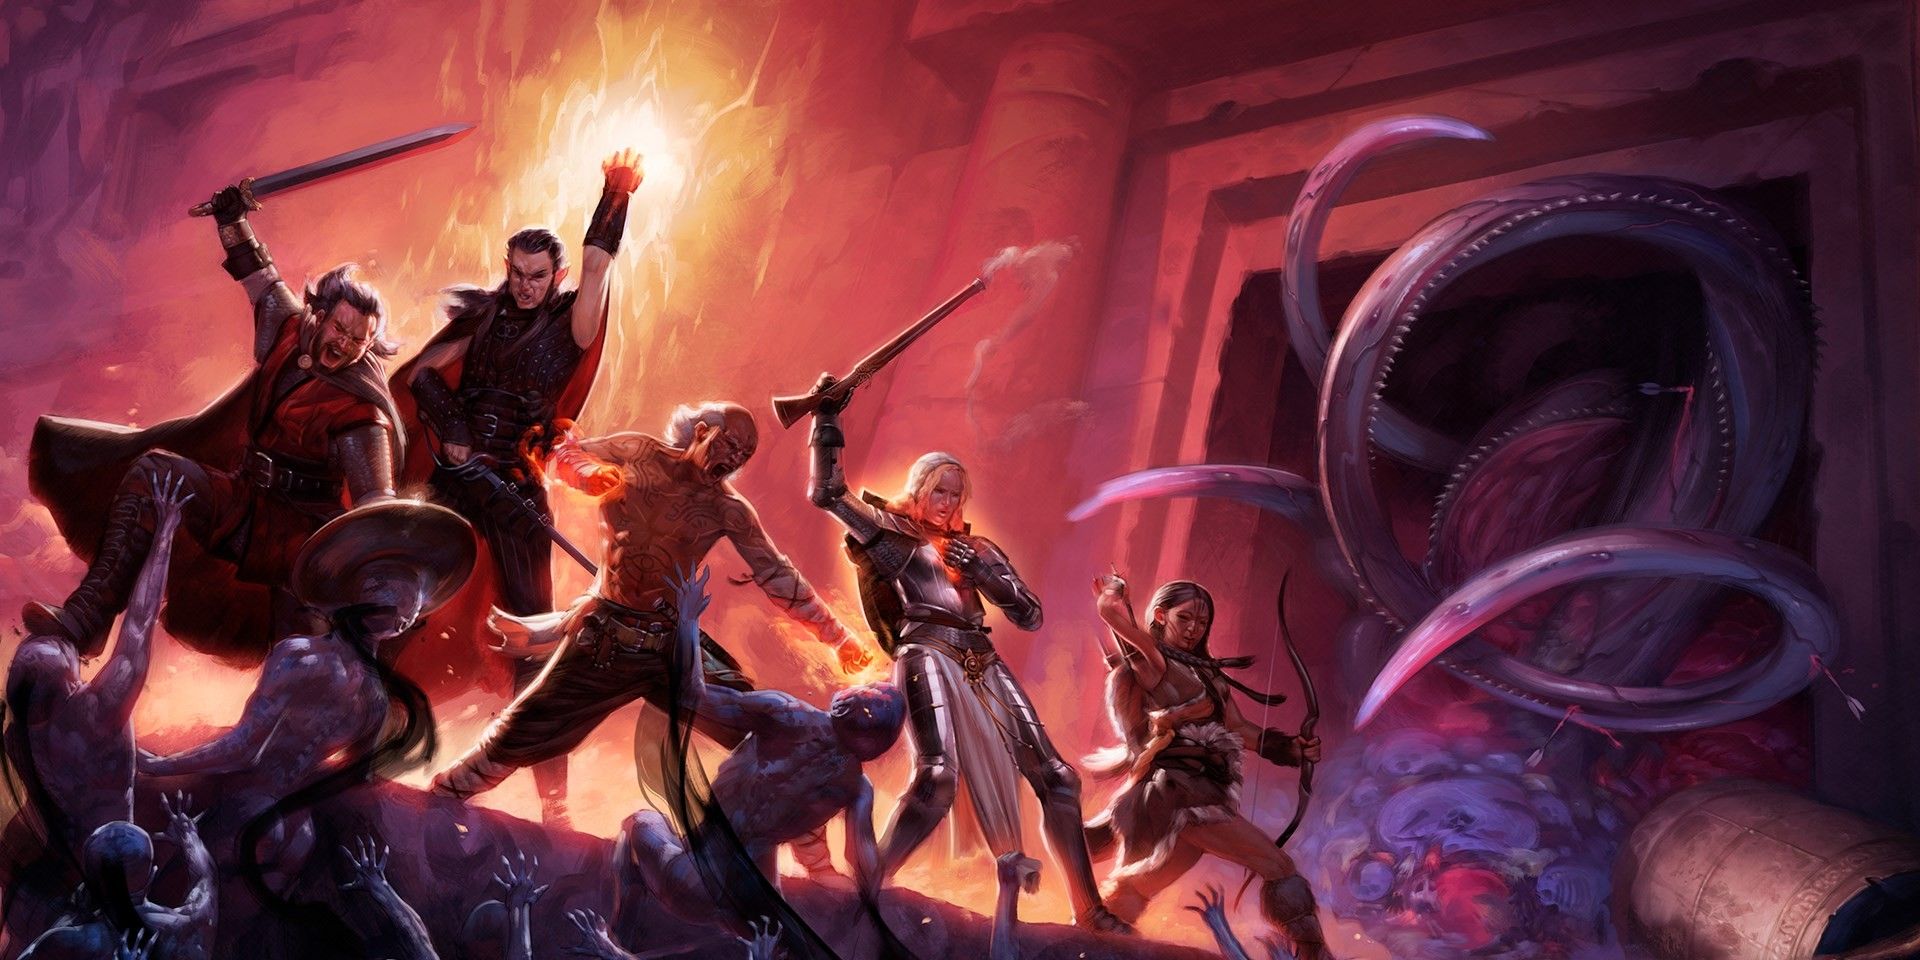 Artwork of the party running a dungeon in pillars of Eternity